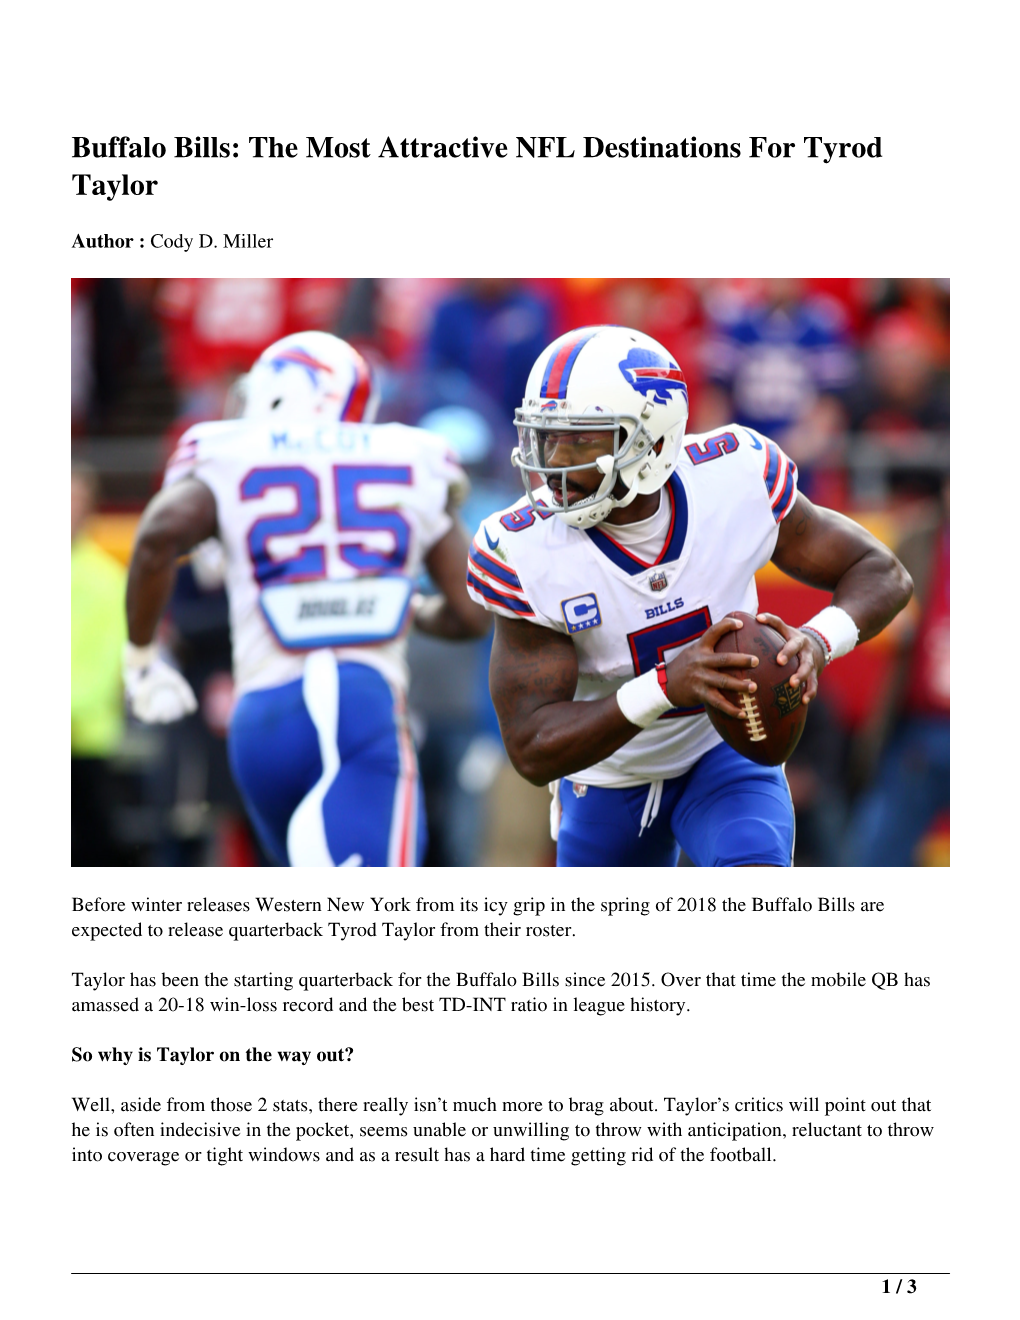 Buffalo Bills: the Most Attractive NFL Destinations for Tyrod Taylor